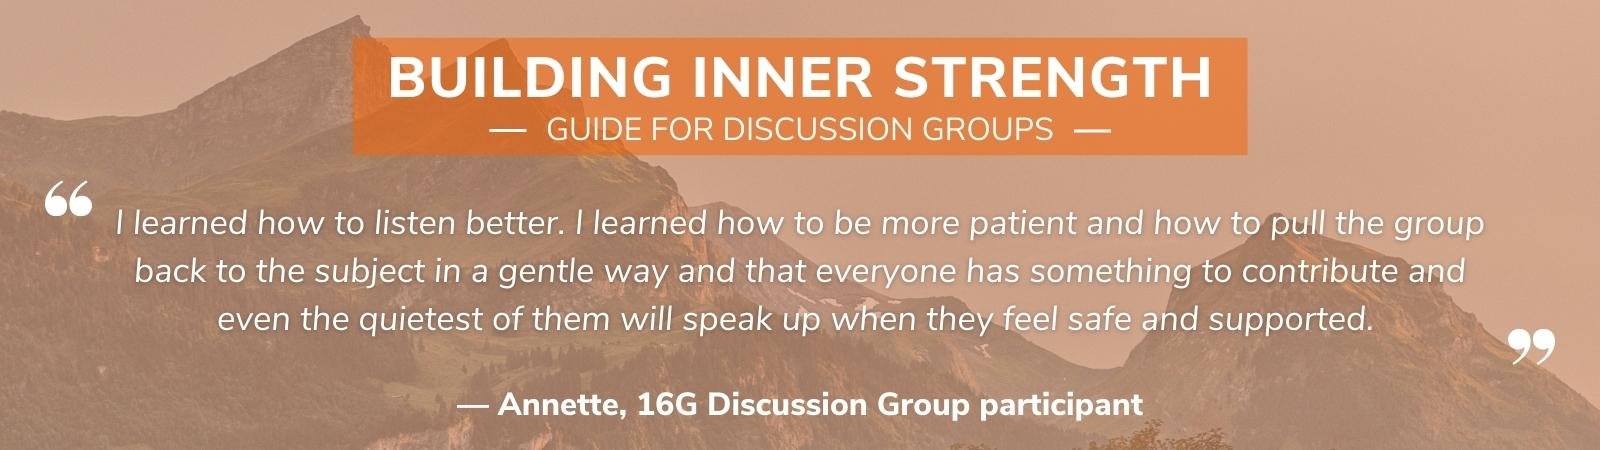 Testimonial - Guide for Discussion Groups - Annette.jpg